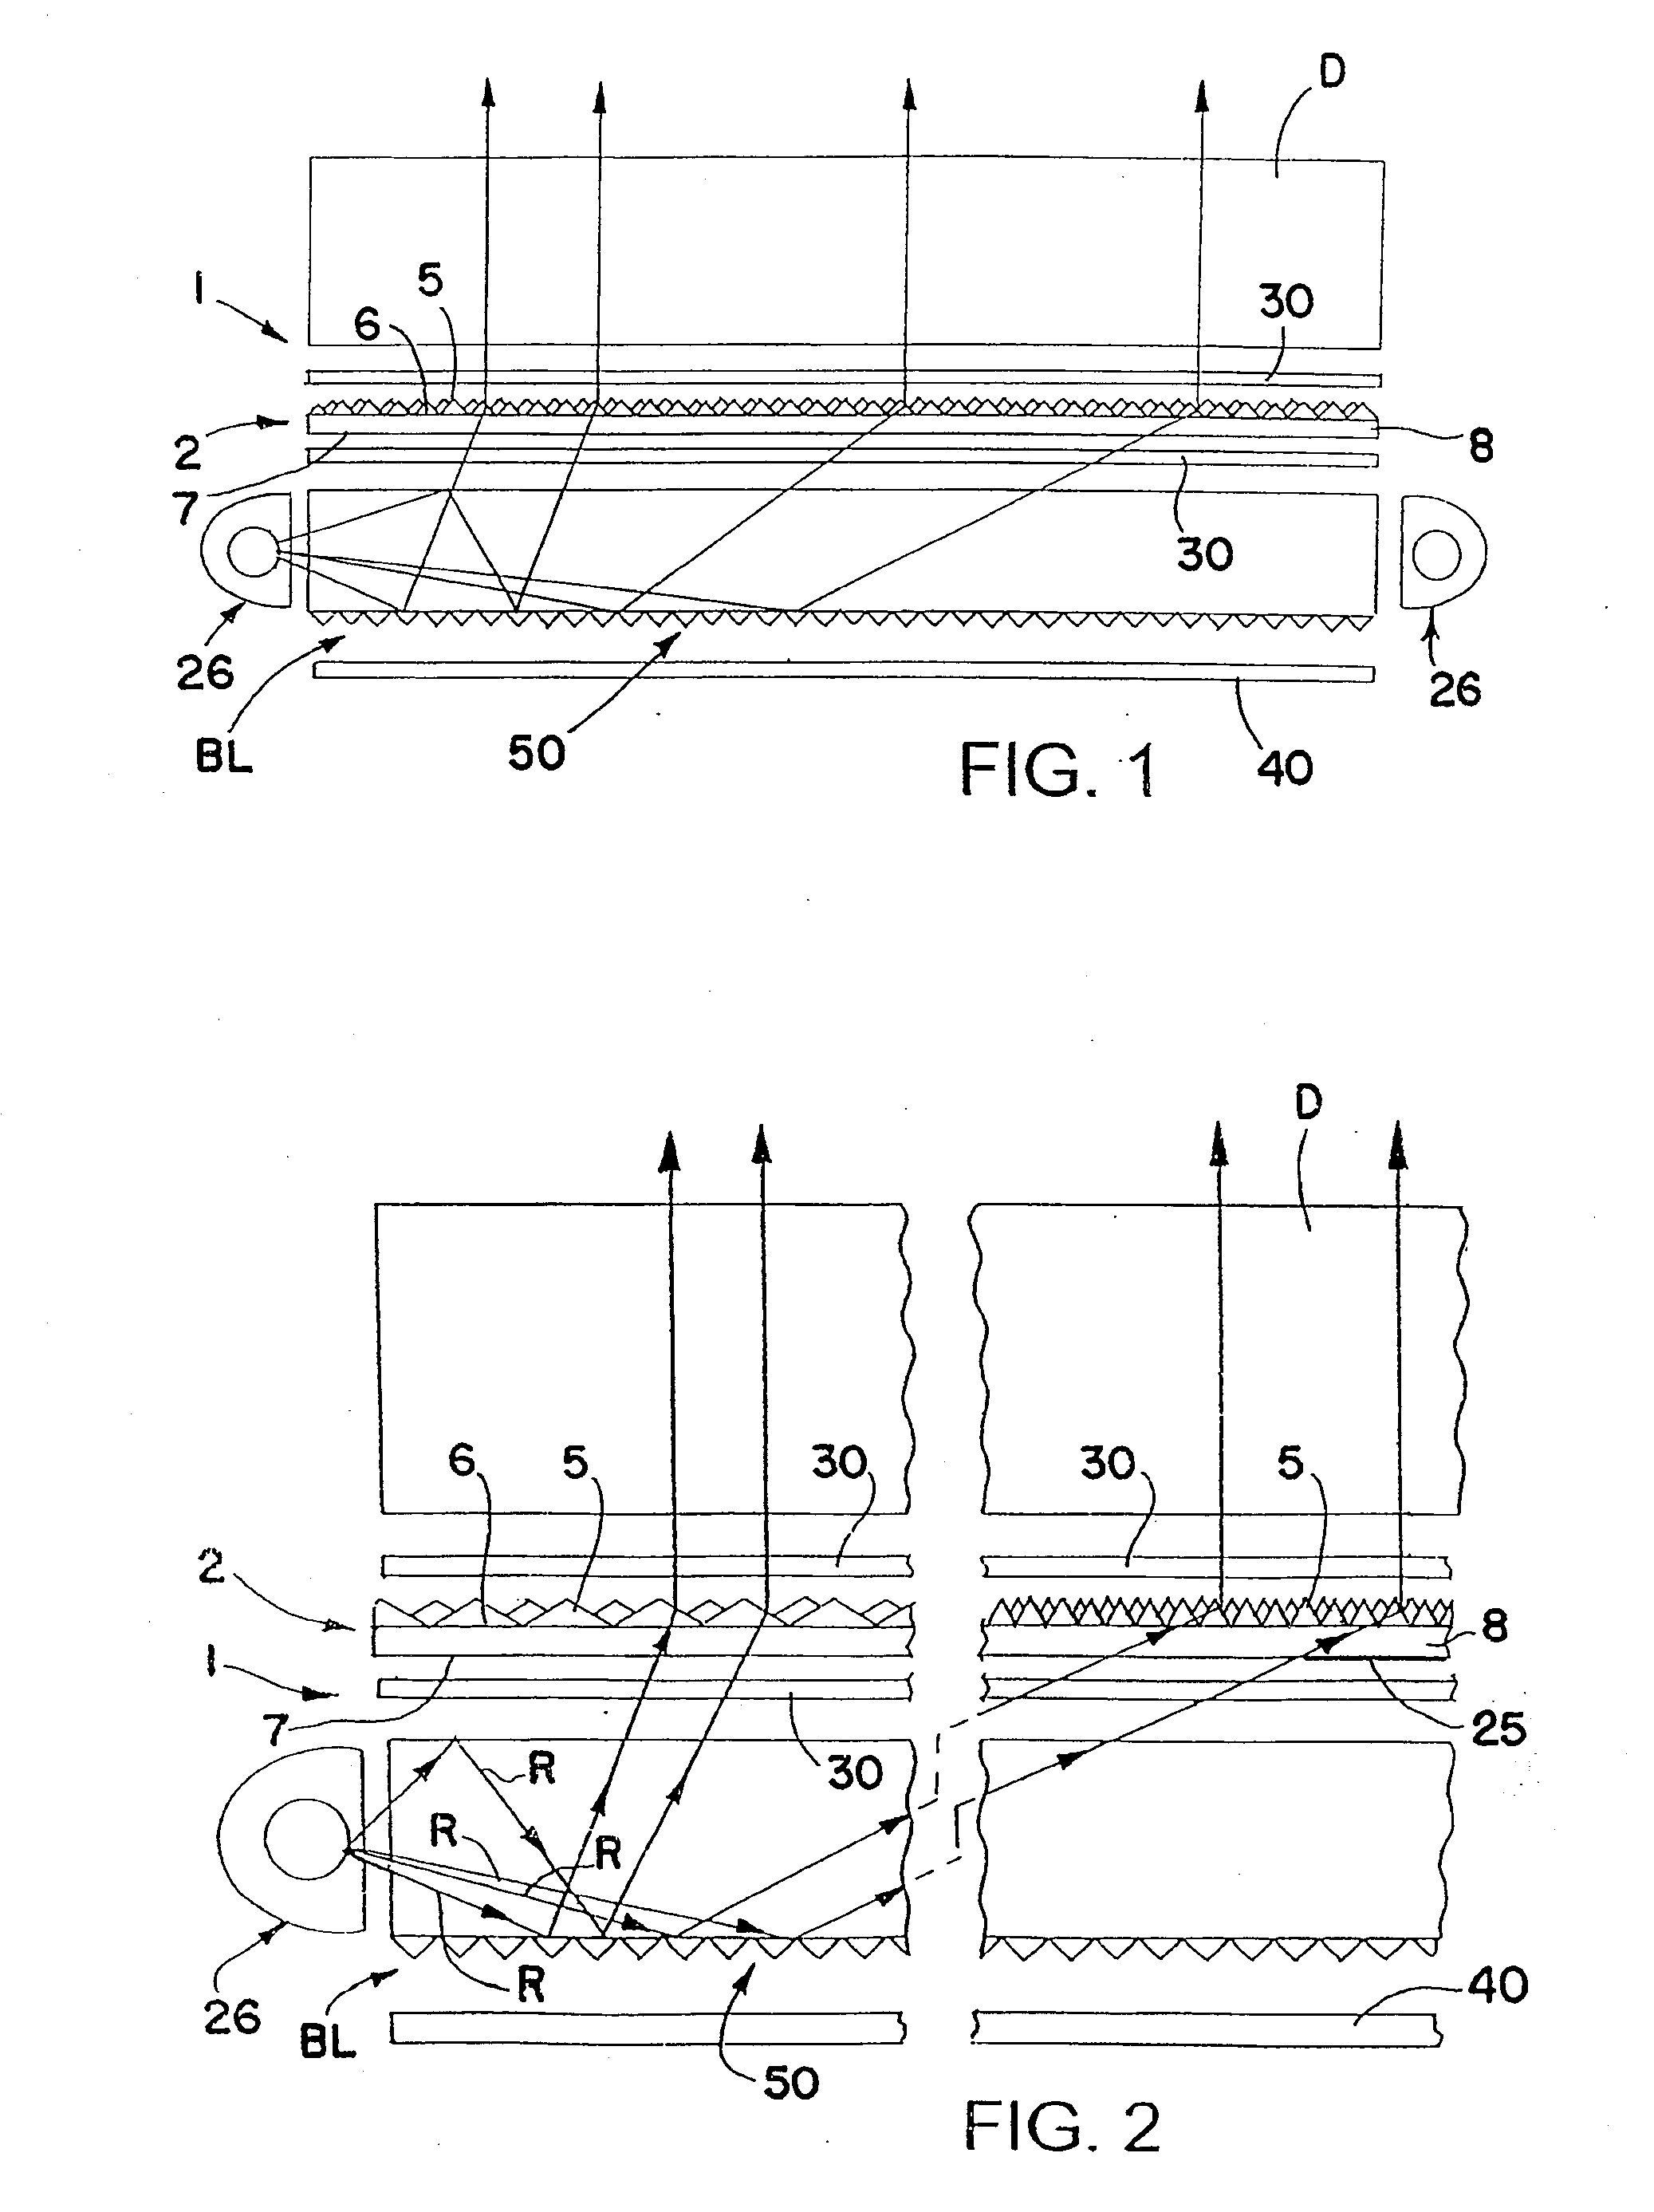 Optically transmissive substrates and light emitting assemblies and methods of making same, and methods of displaying images using the optically transmissive substrates and light emitting assemblies